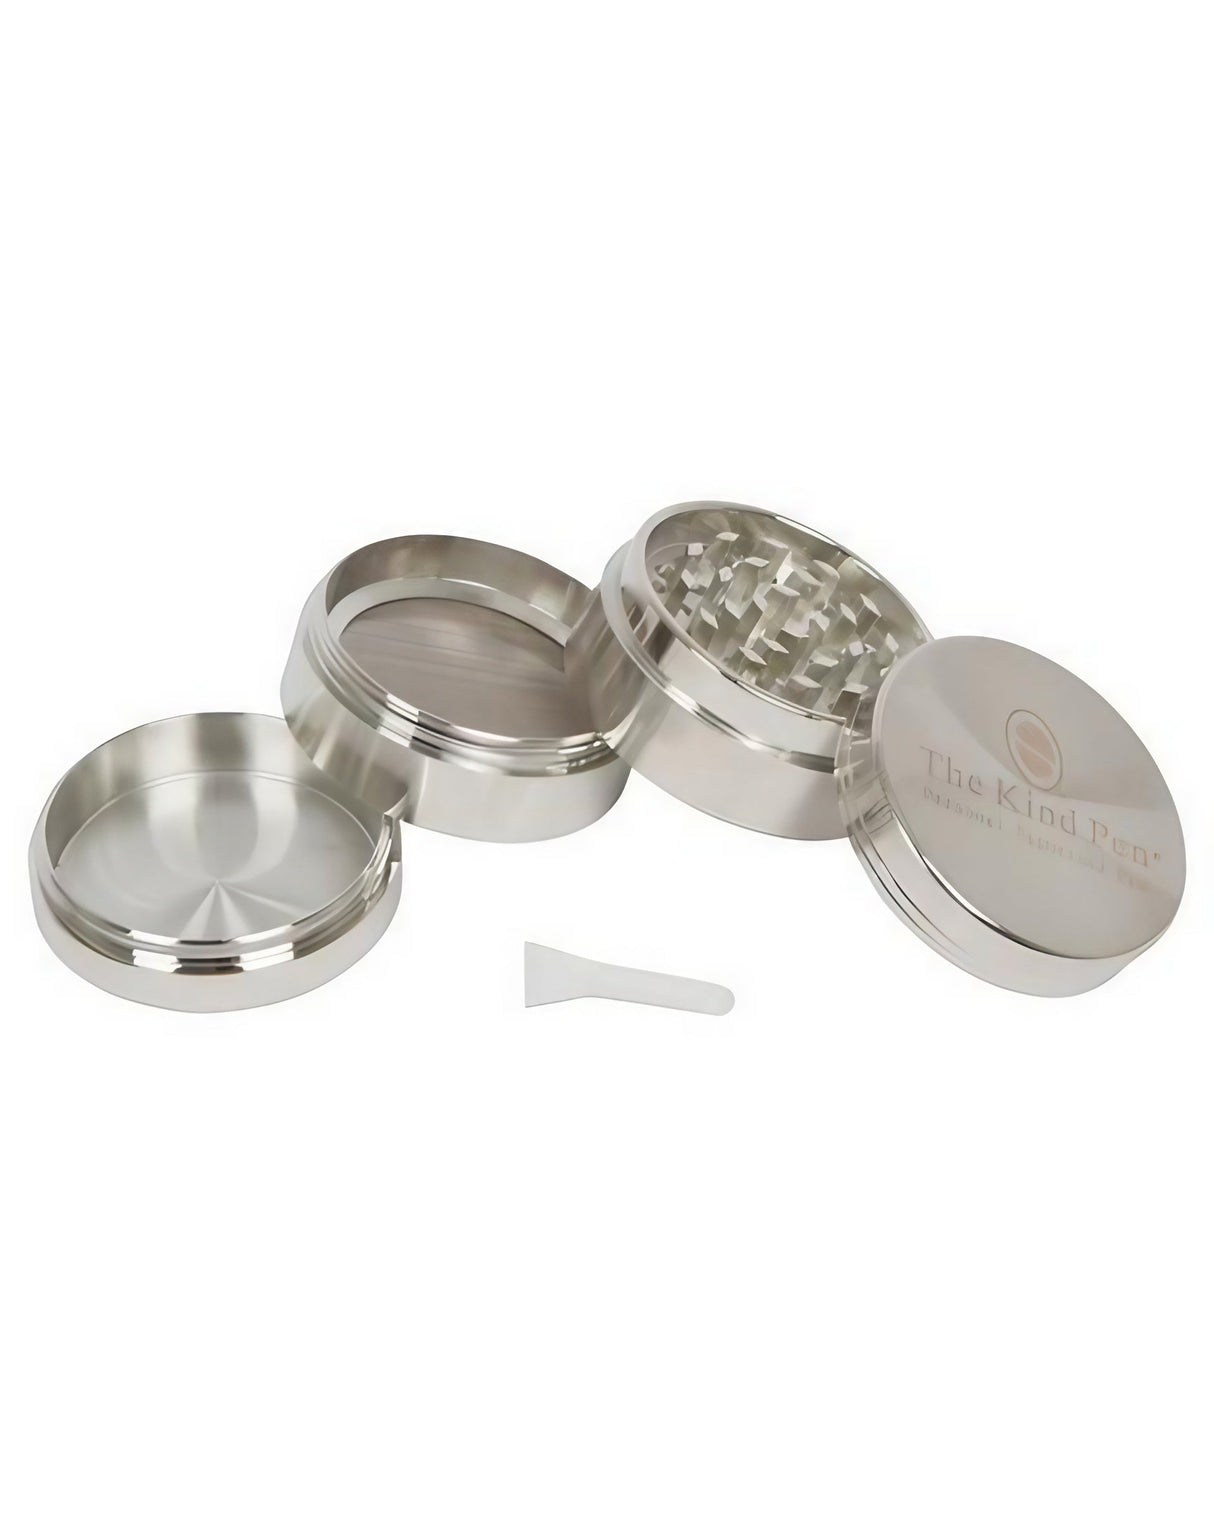 Disassembled Tri-Level Herb Grinder in Silver, showcasing its compact and portable 4-part design